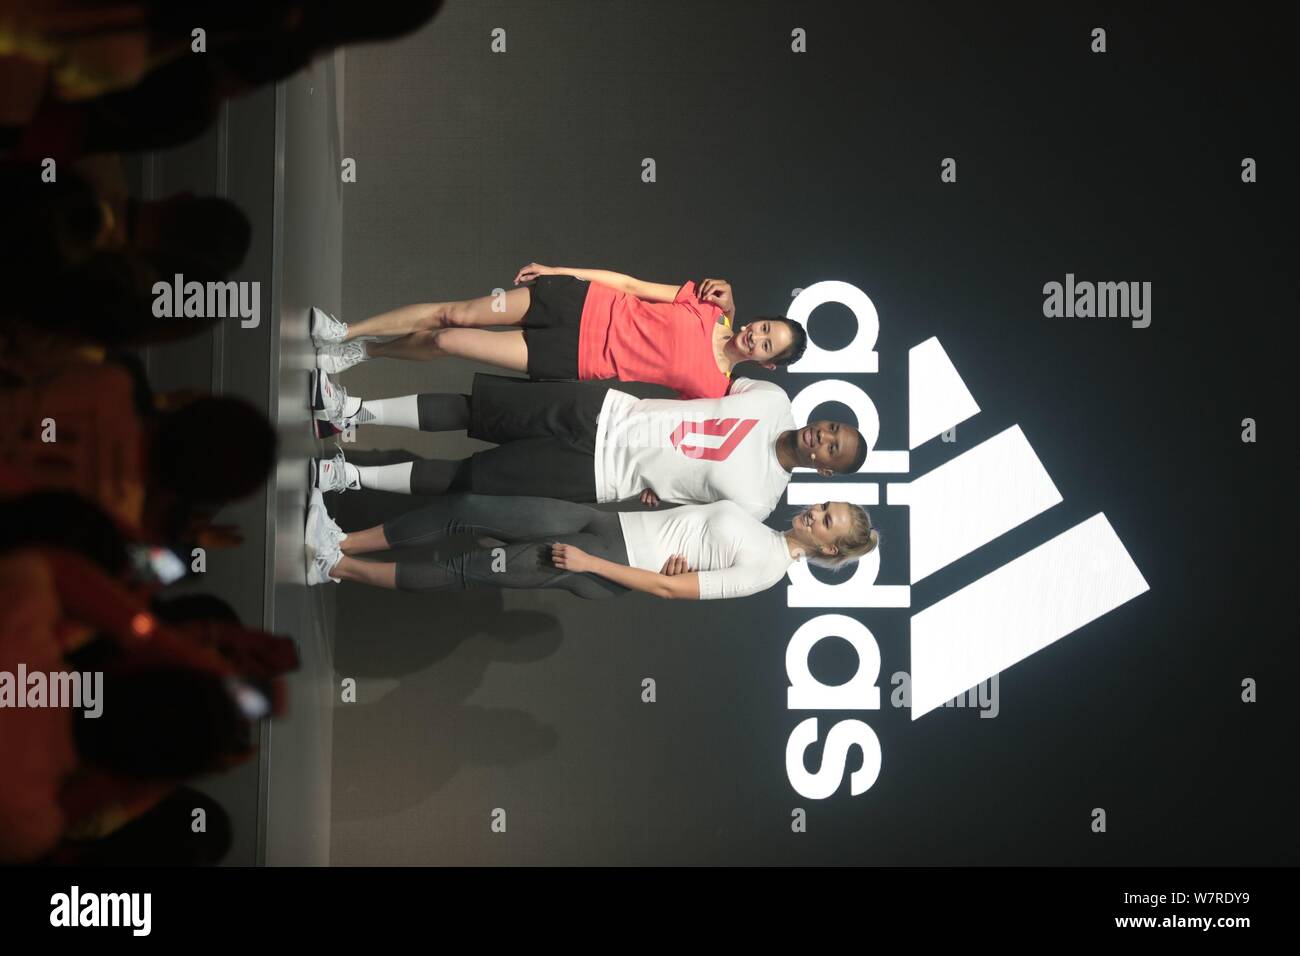 American basketball player Damian Lillard, center, American fashion model and entrepreneur Karlie Kloss, right, attend a promotional event adidas Stock Photo - Alamy